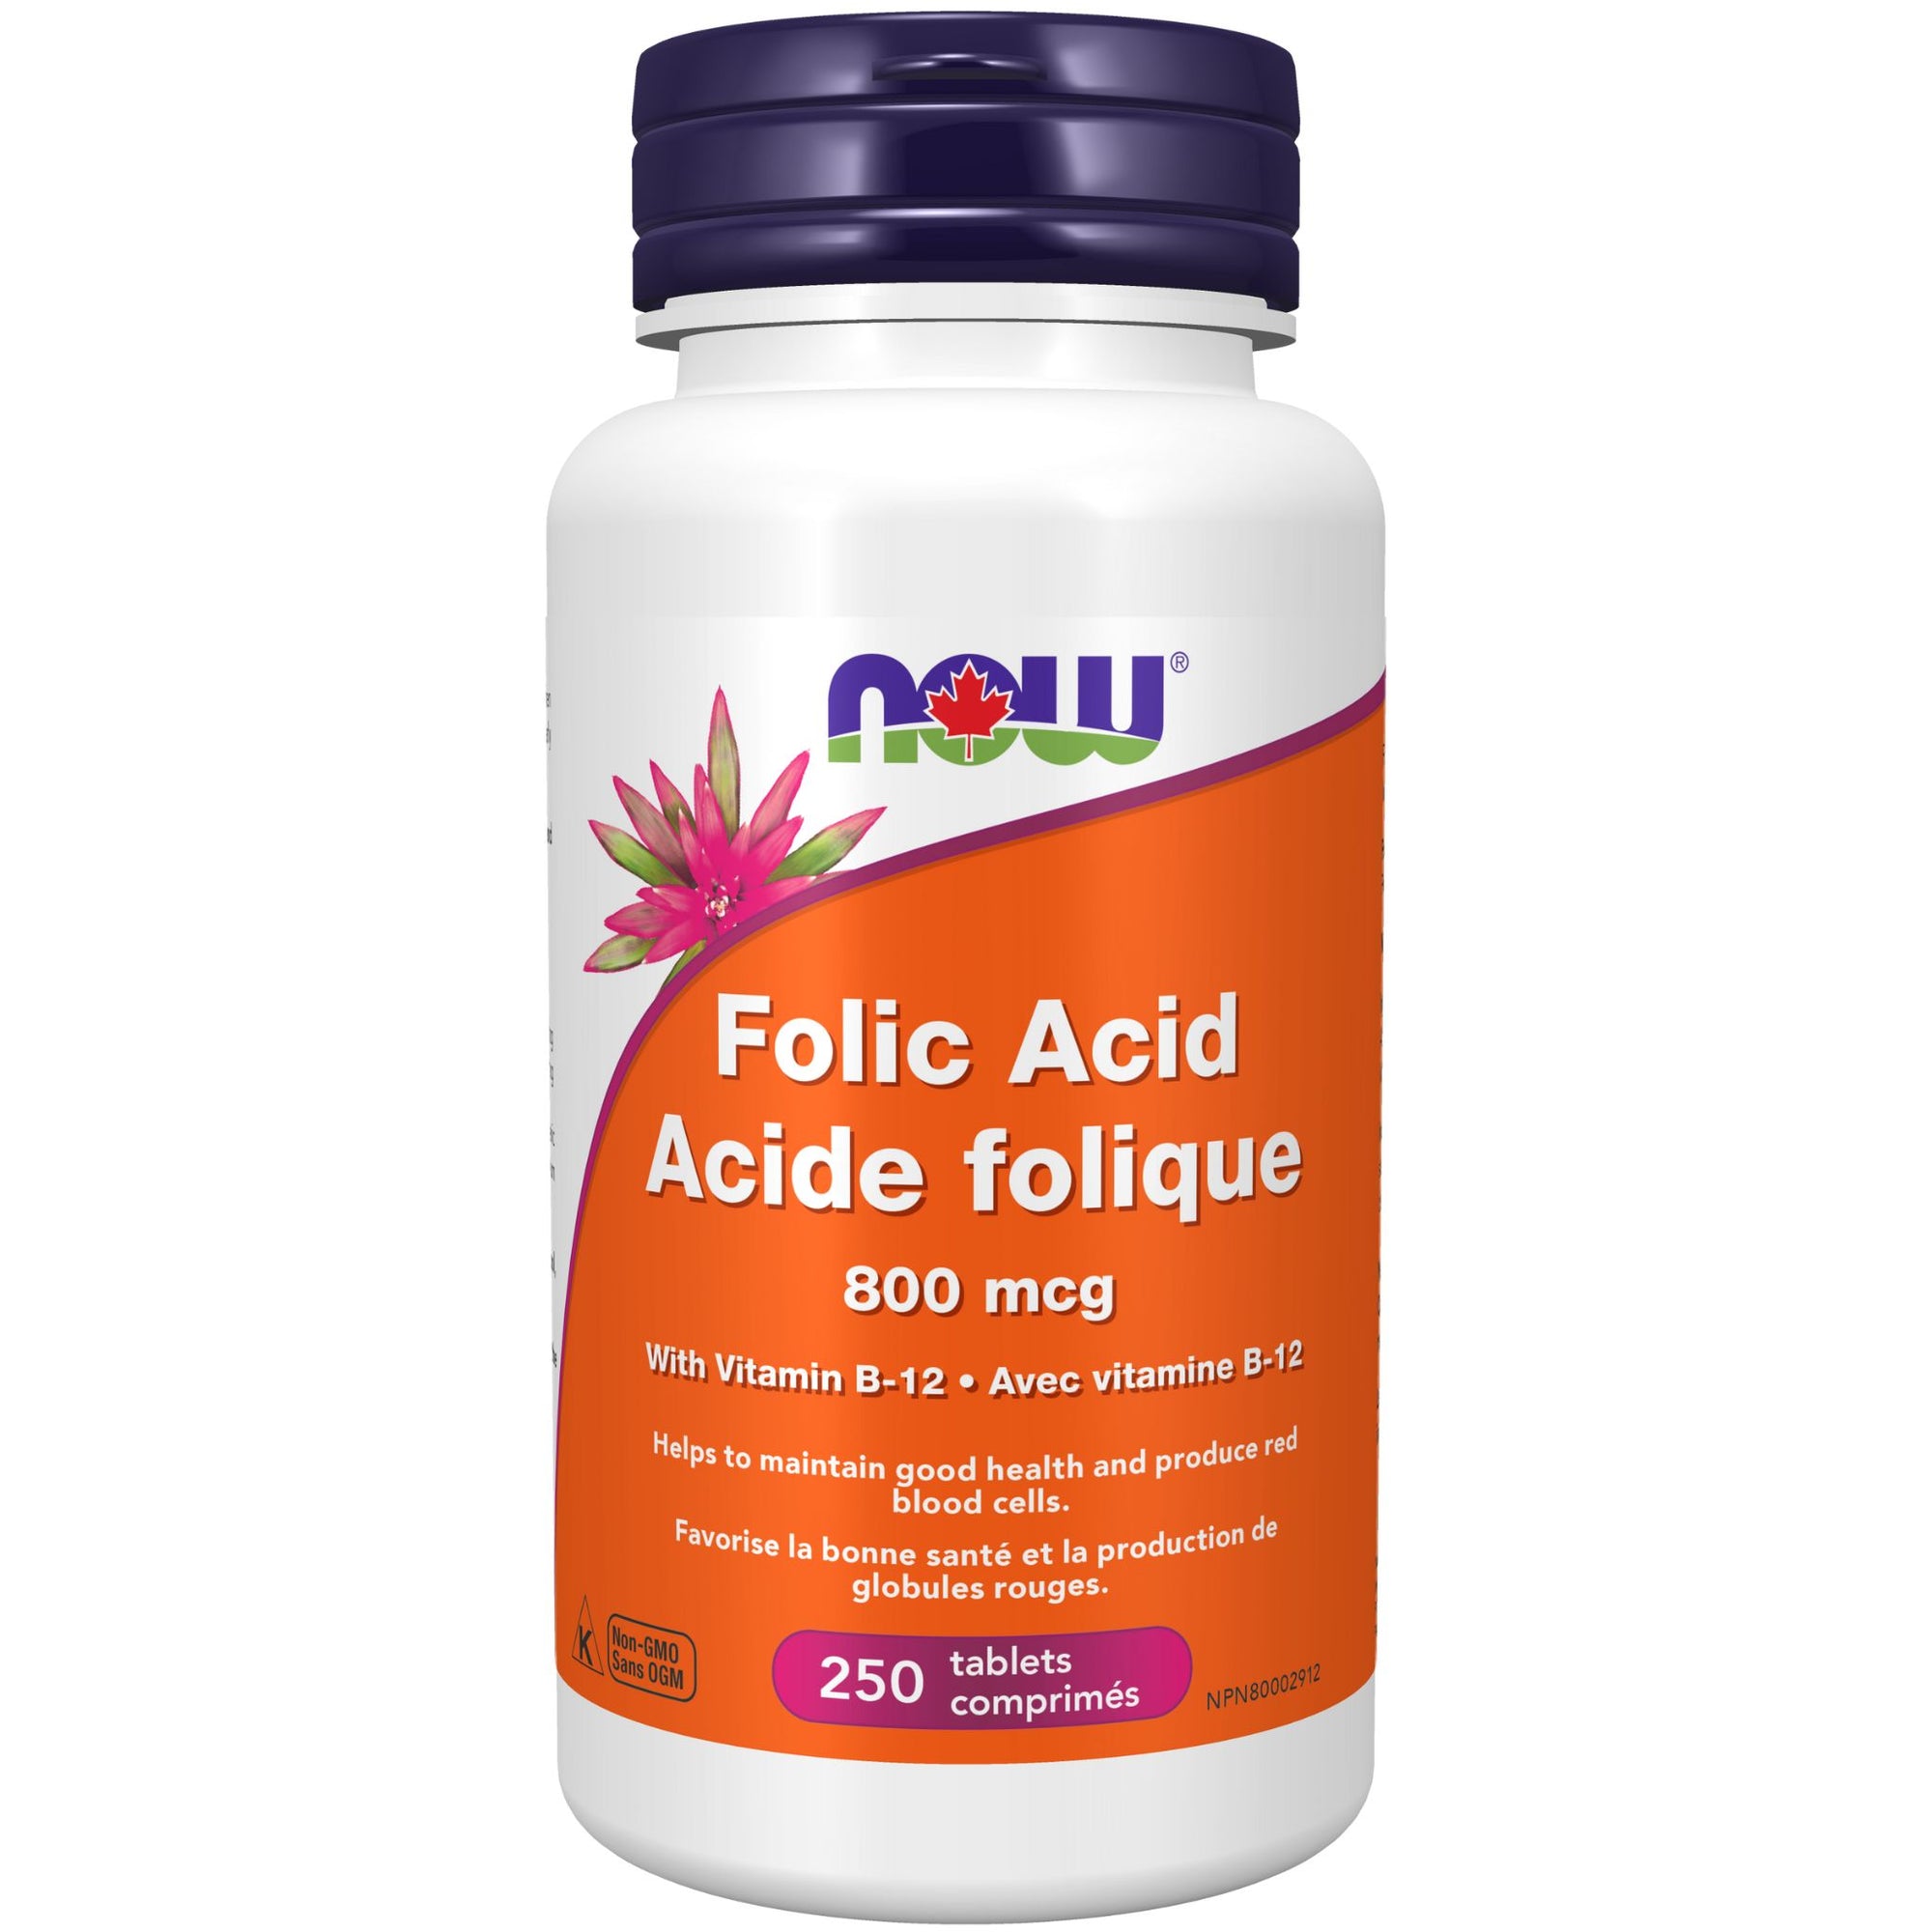 NOW Folic Acid 800 mcg with Vitamin B12 - 250 tablets bottle. Helps to maintain good health and produce red blood cells. 